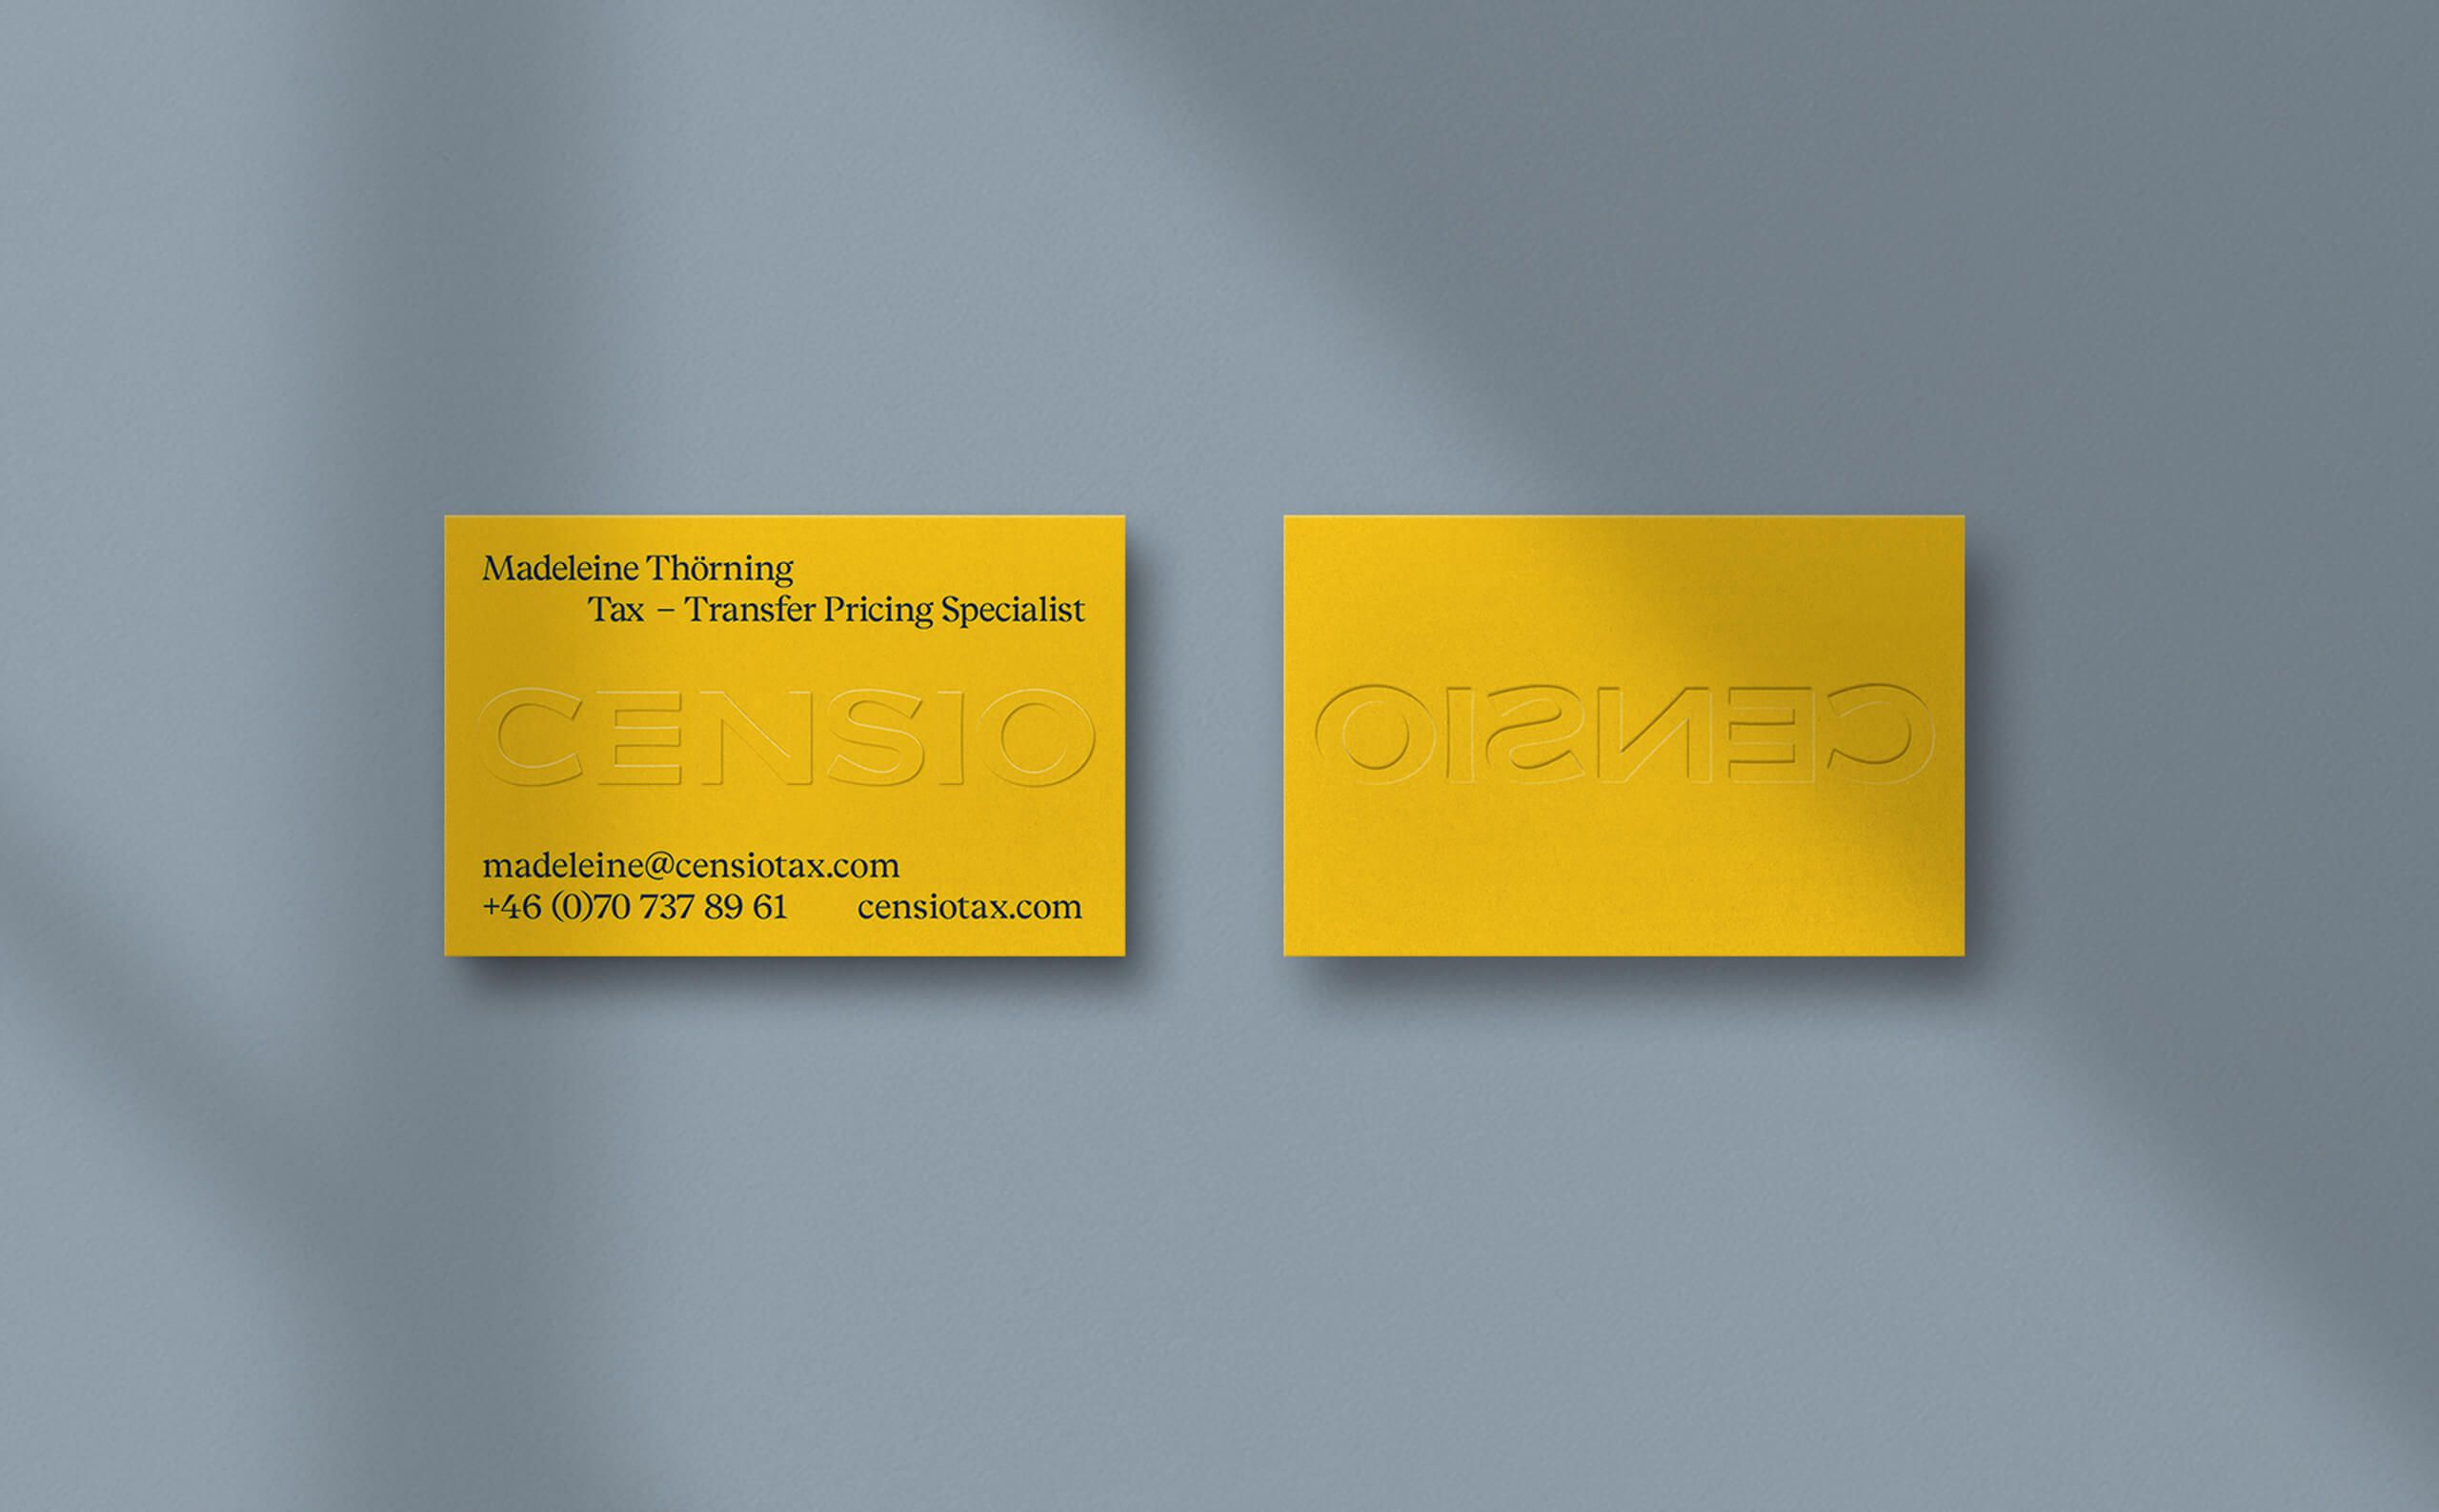 Censio - Business cards